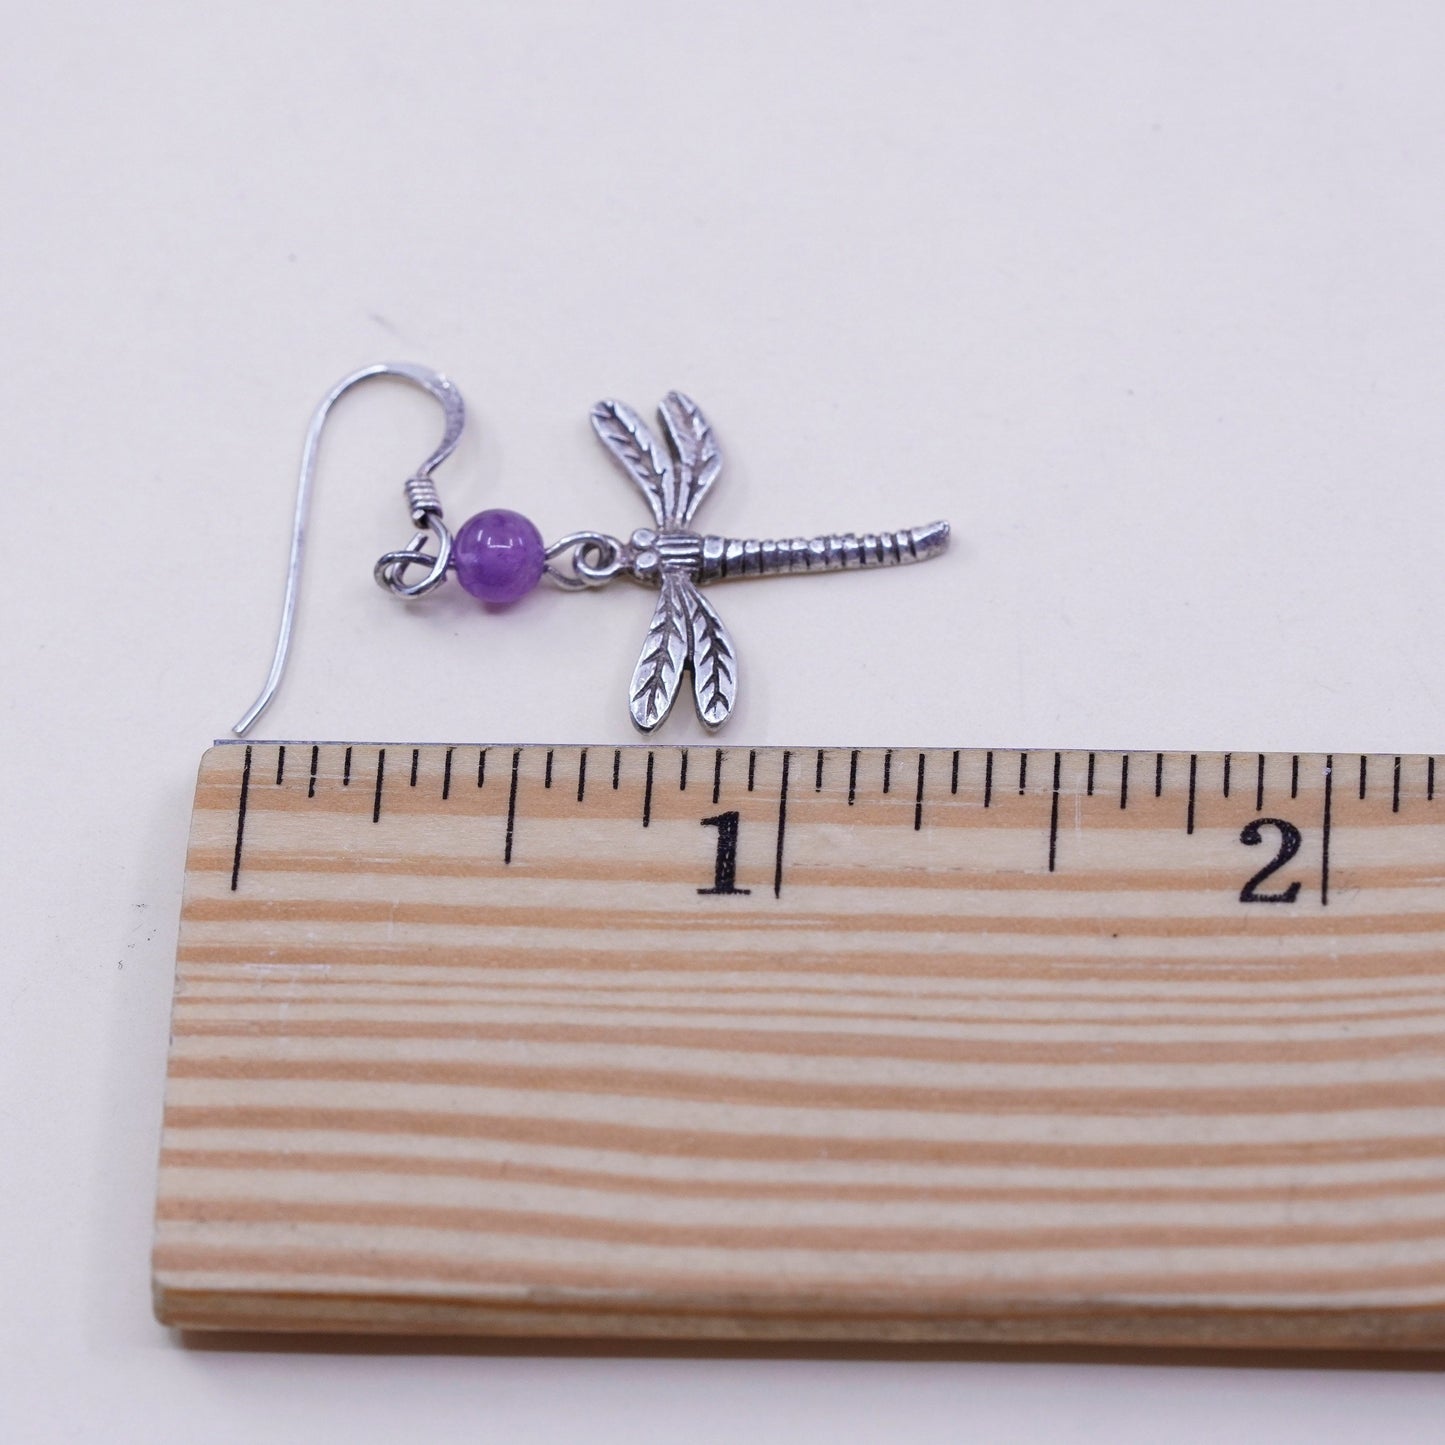 Vintage handmade sterling 925 silver dragonfly earrings with amethyst